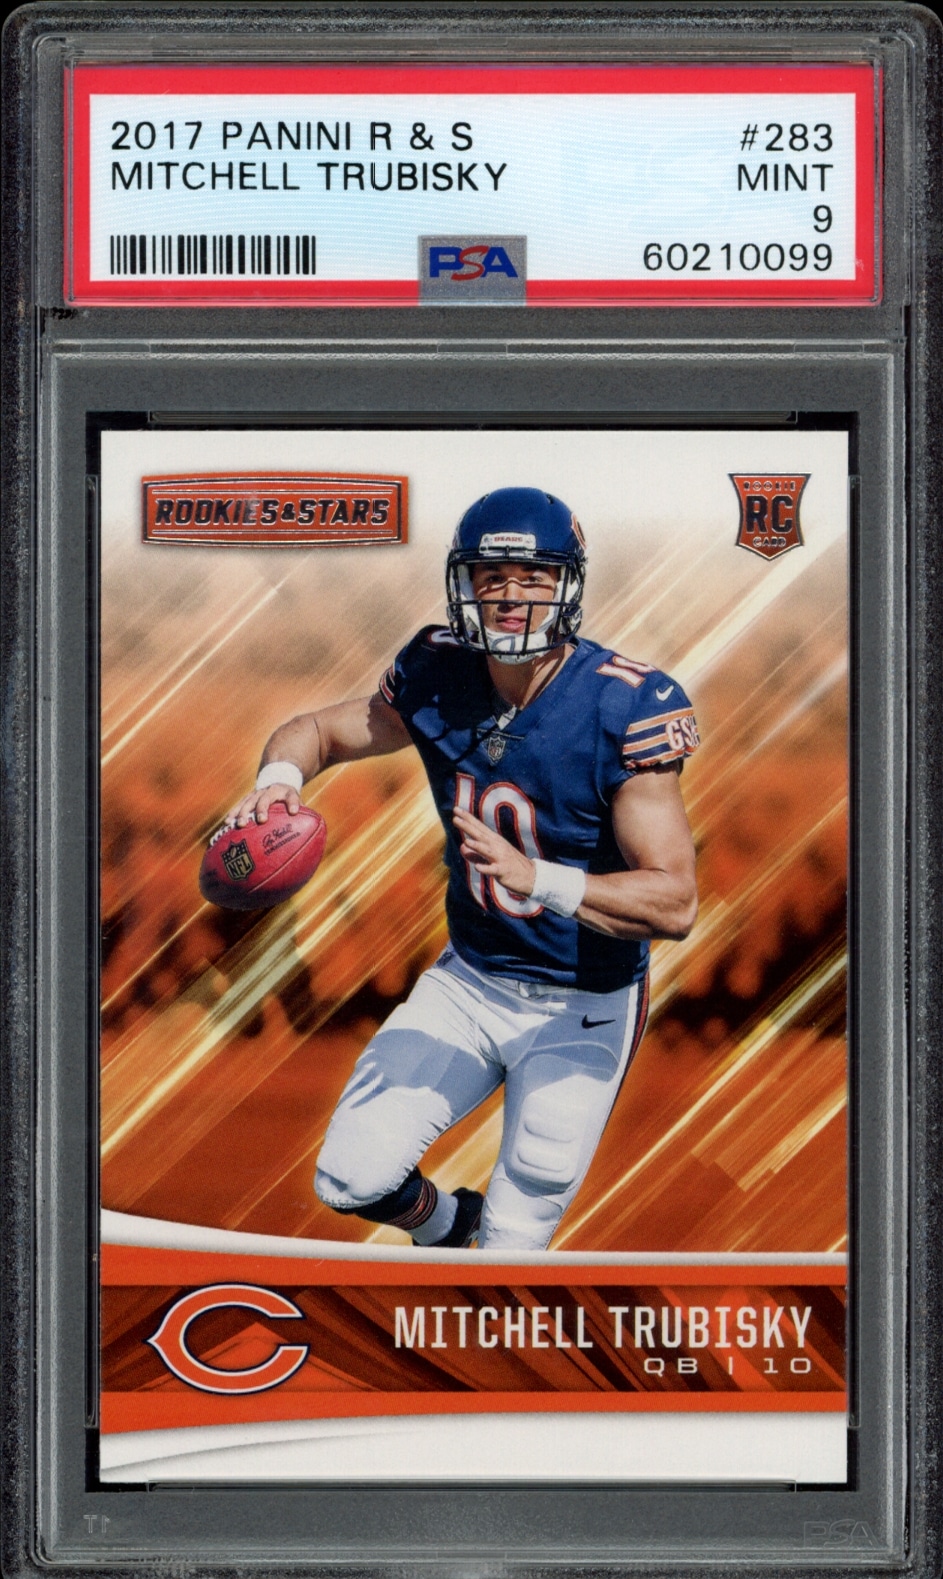 Mint 9 graded 2017 Panini card of NFLs Mitchell Trubisky in action.